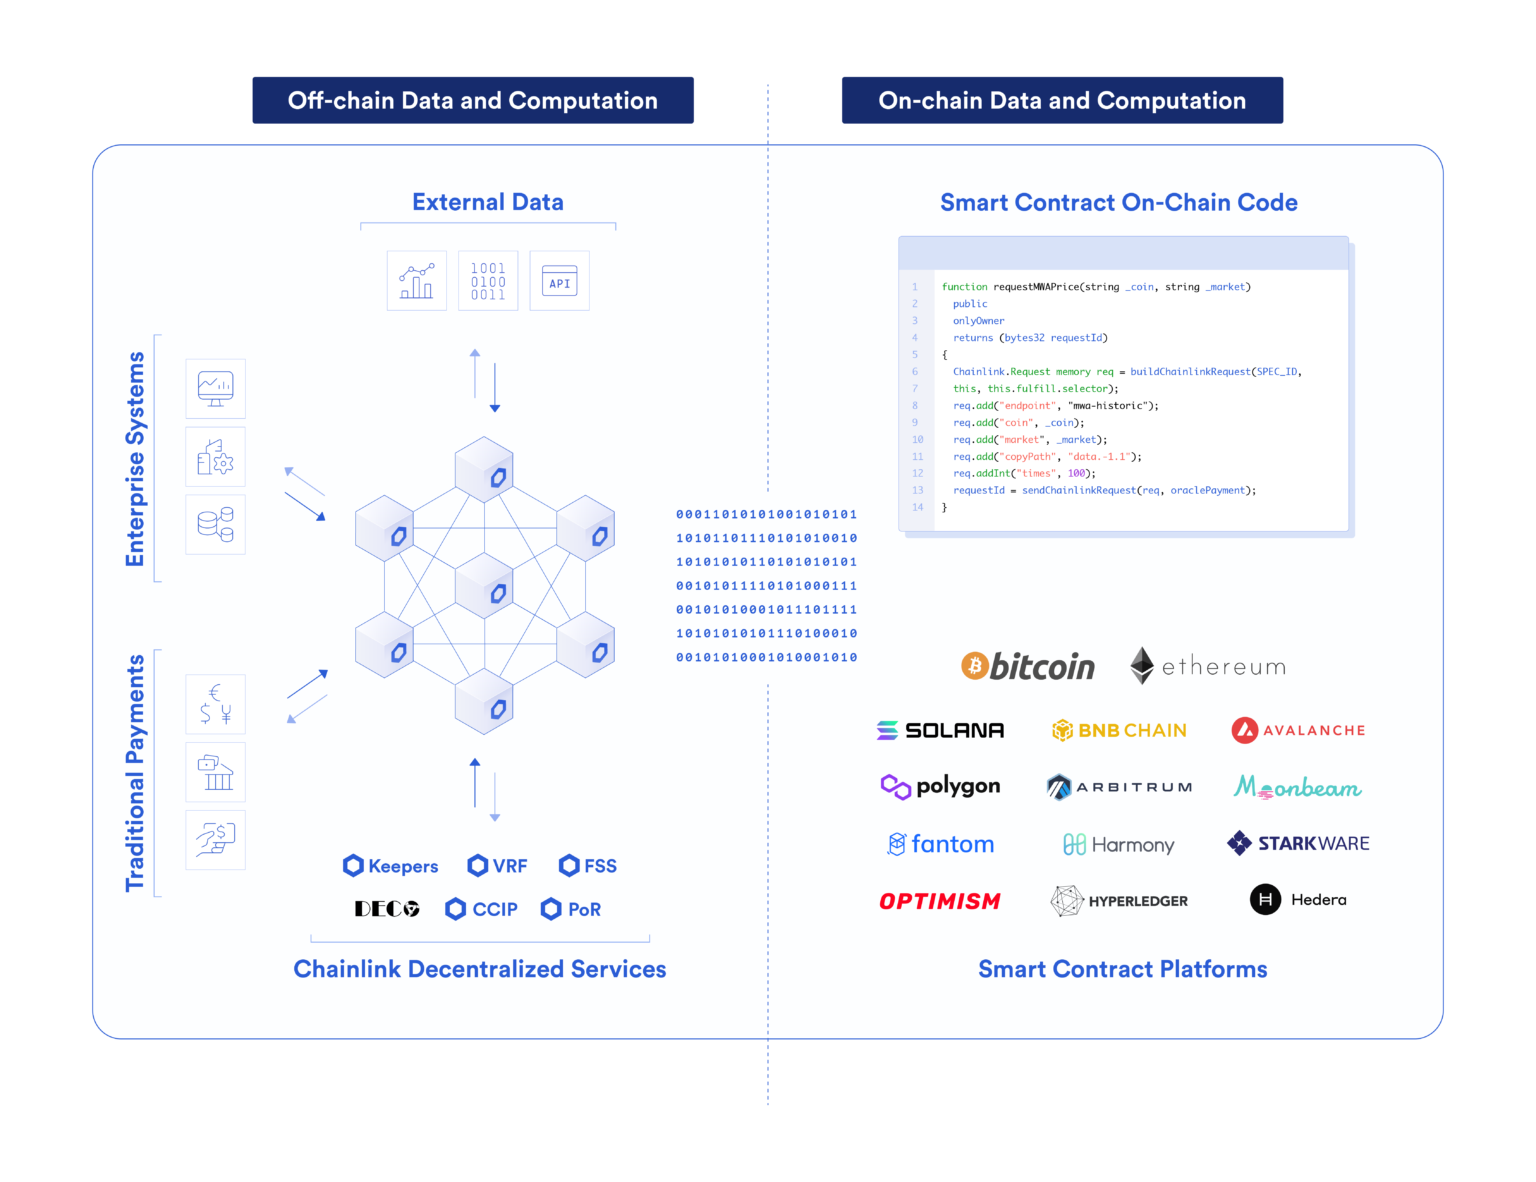 Hybrid smart contracts and Chainlink services